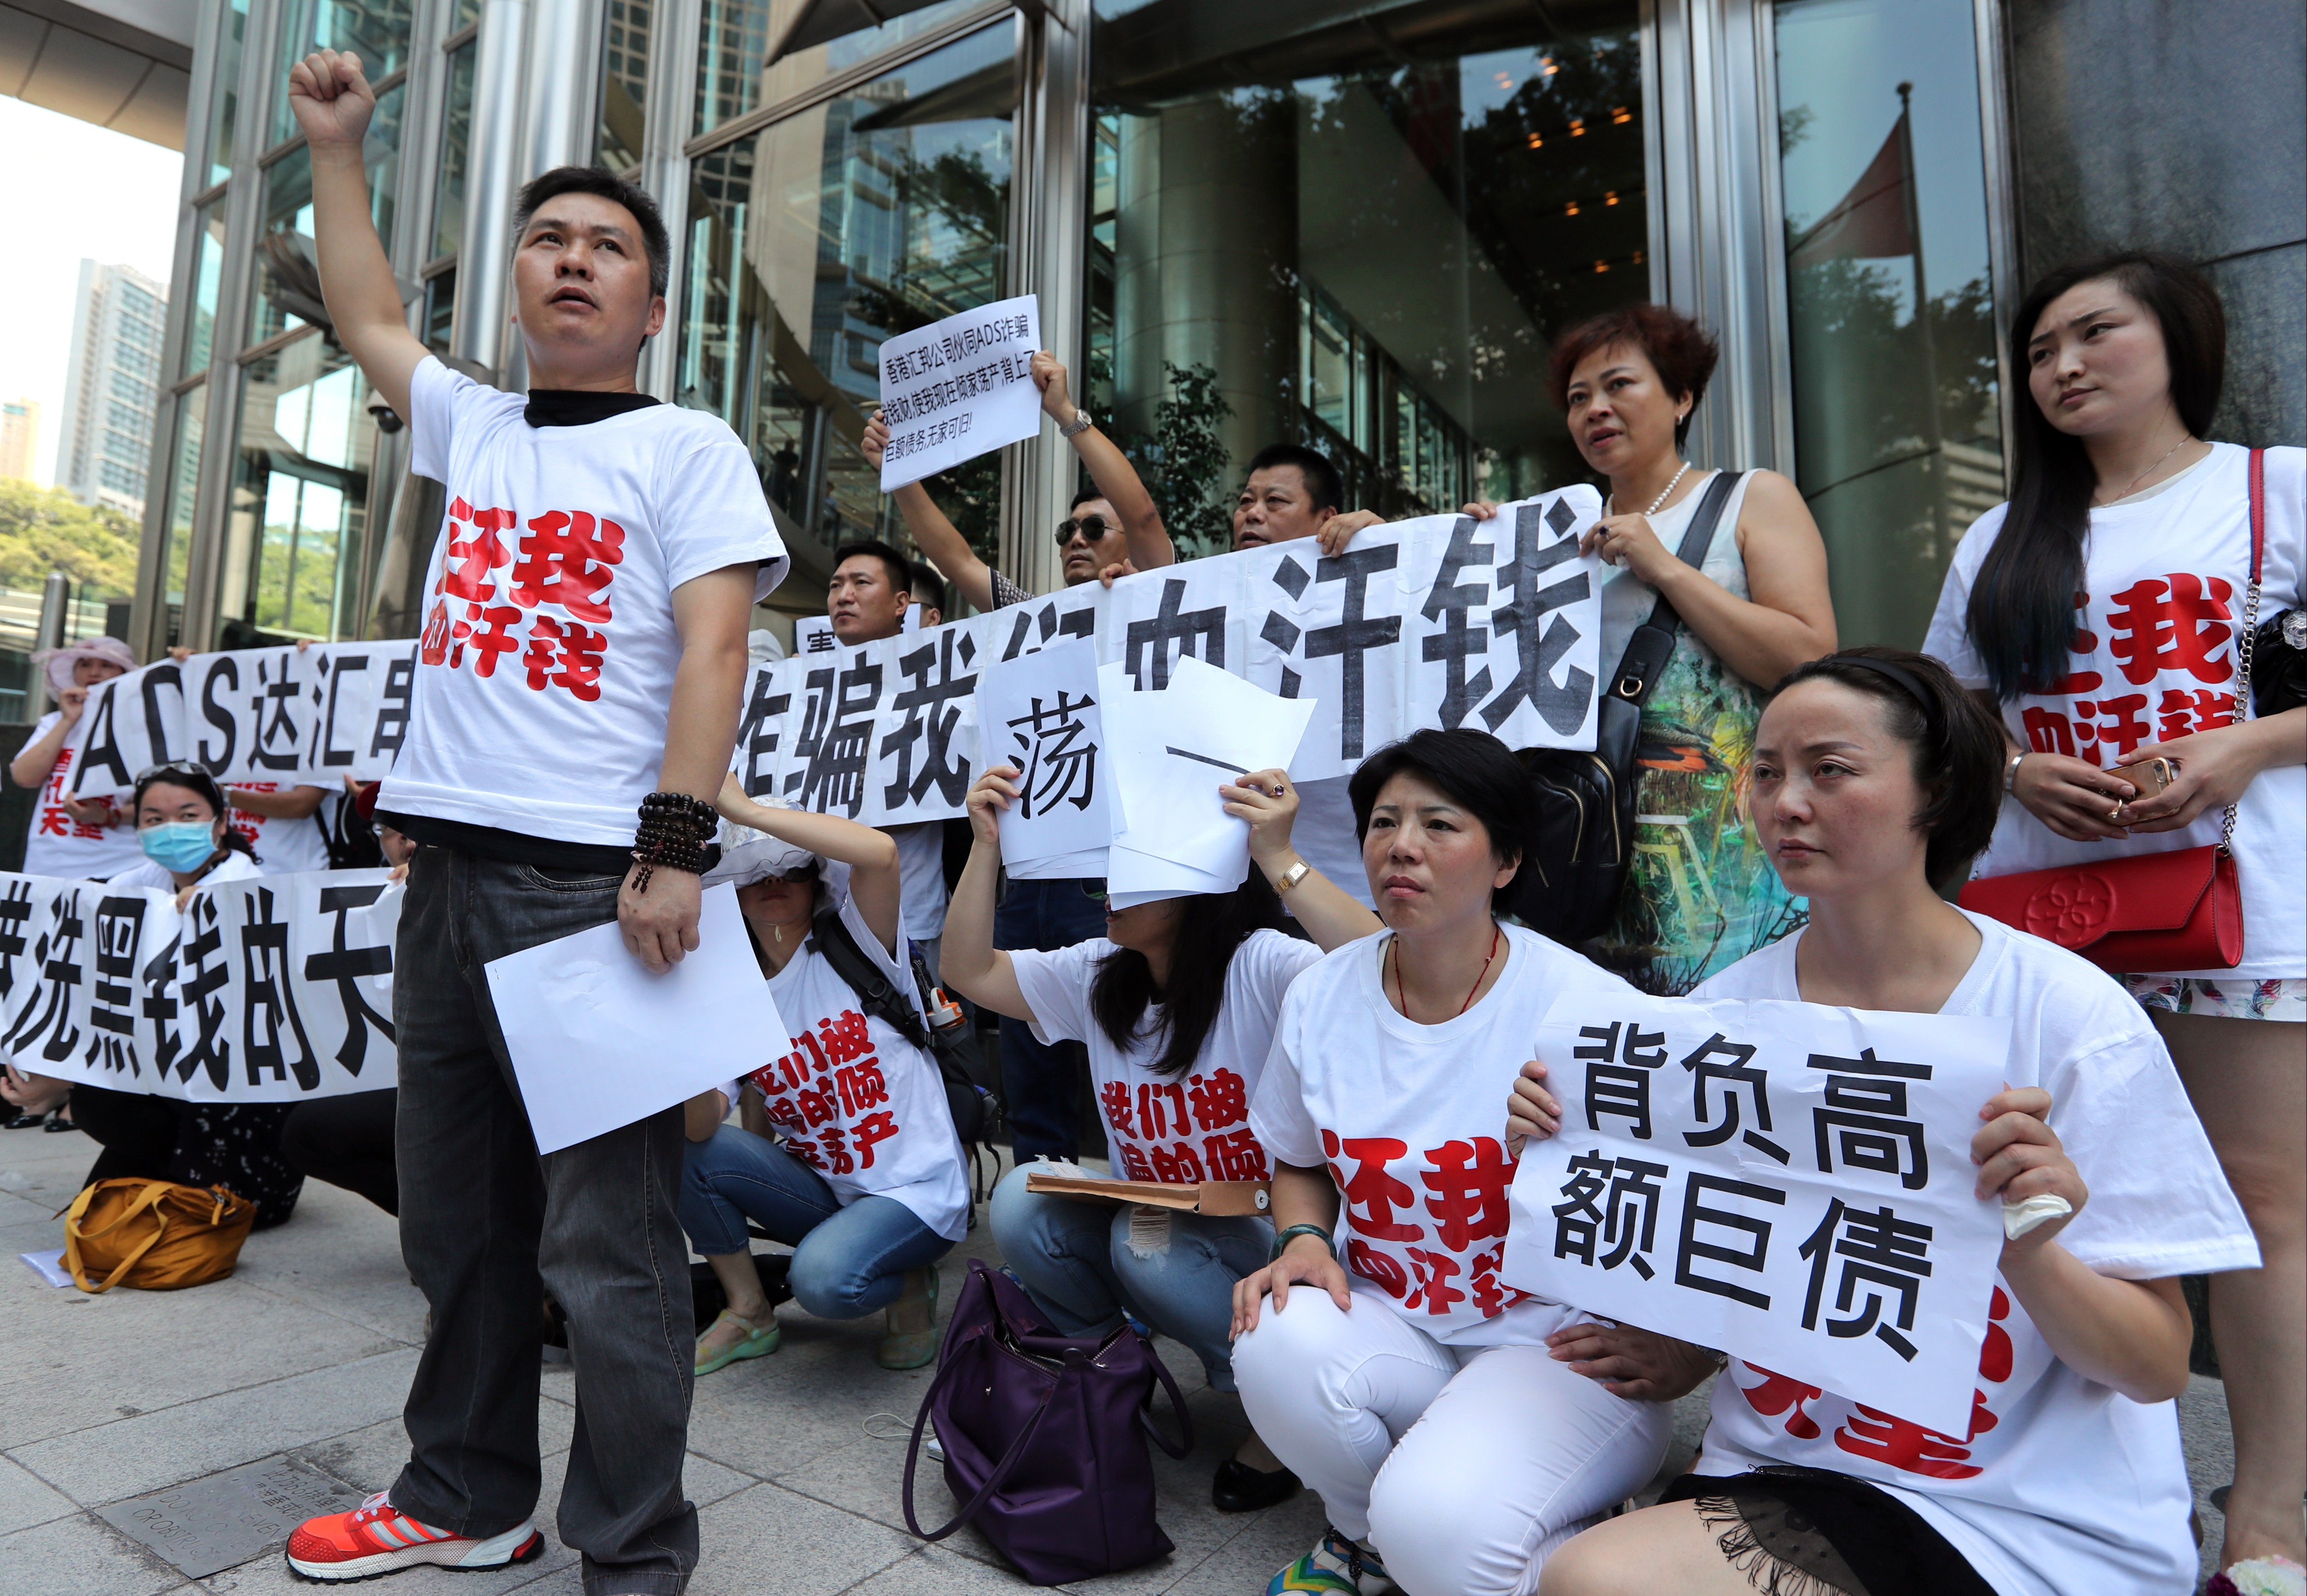 Mainland investors at a June 2016 rally before the Hong Kong Securities and Futures Commission (SFC) and the Hong Kong Monetary Authority (HKMA)after losing all their savings in a US$10 billion scam. Photo: SCMP/ Edward Wong